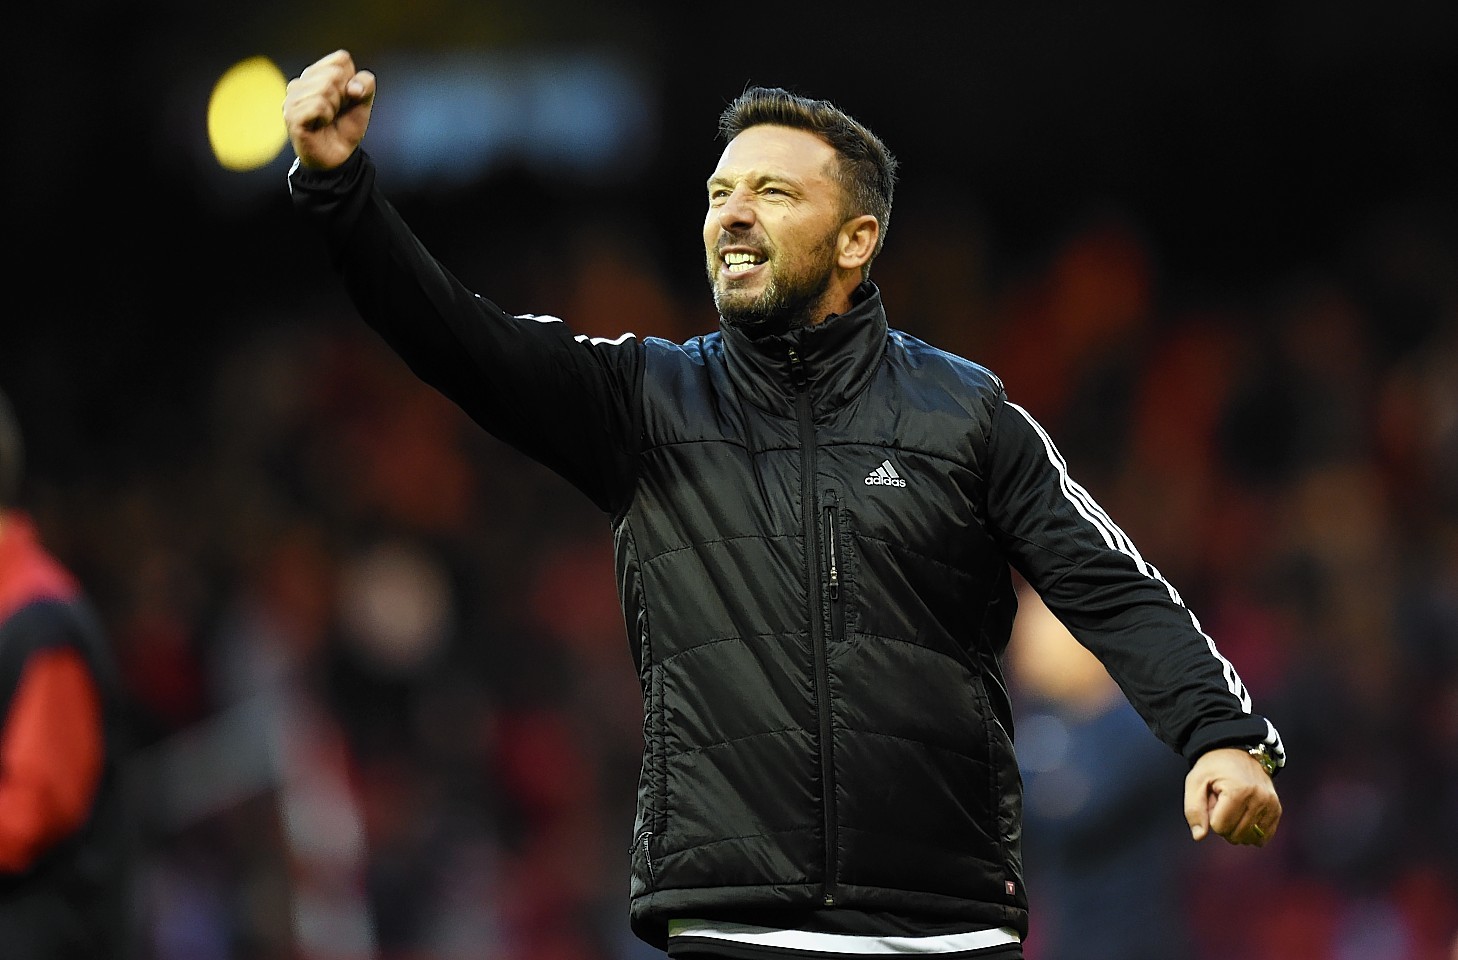 Derek McInnes knows the home crowd can play an important role for the Dons